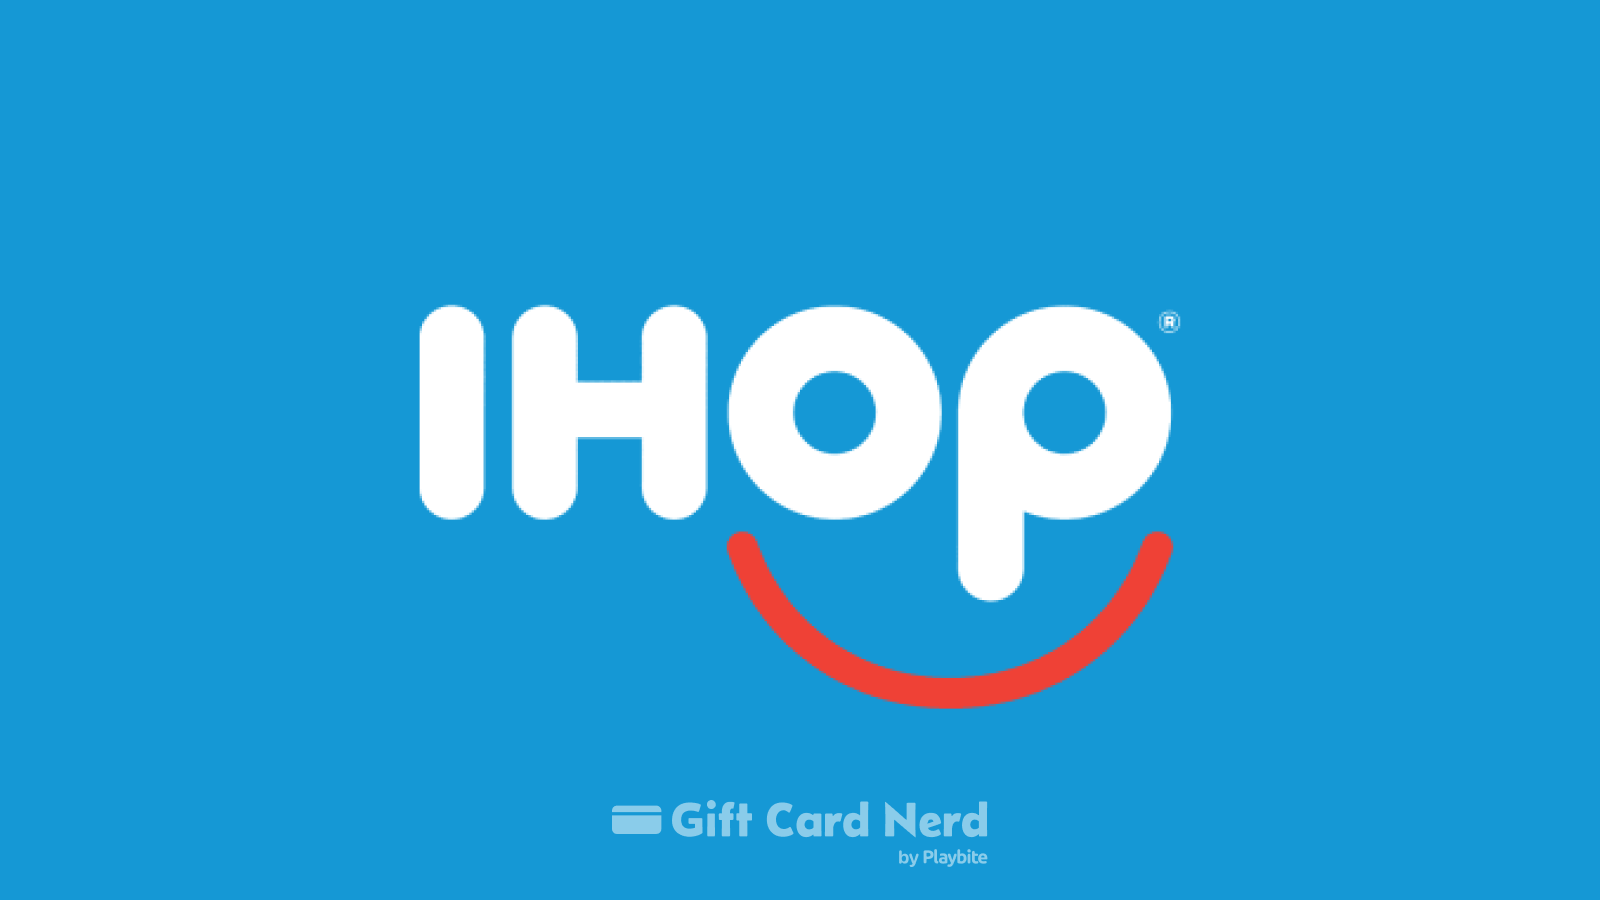 Does Amazon Sell IHOP Gift Cards?